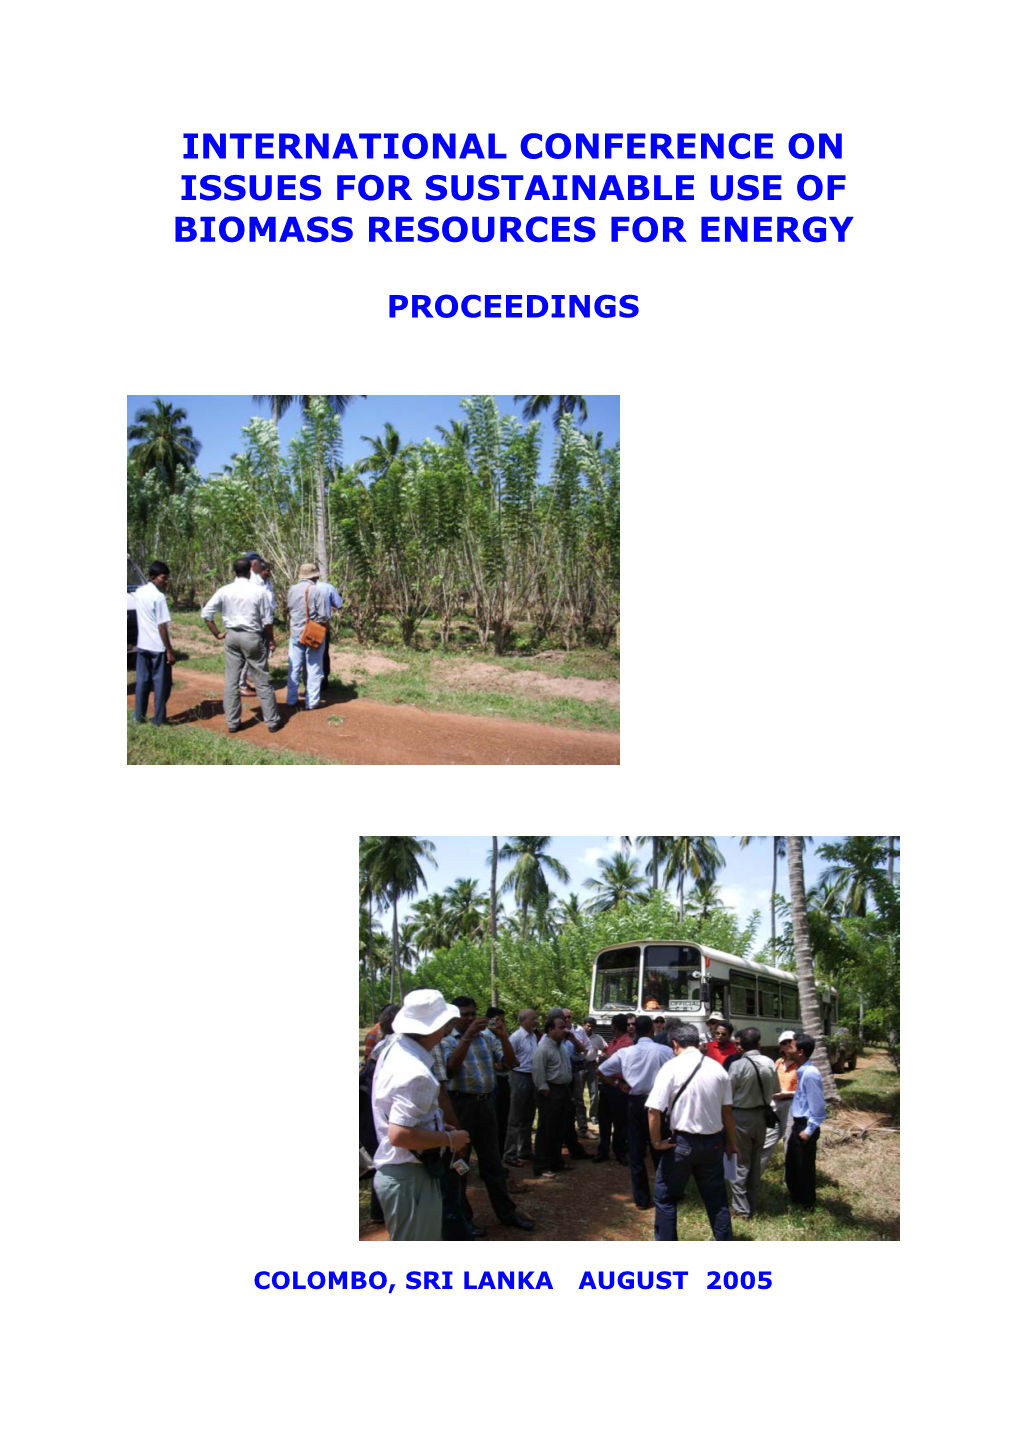 International Conference on Issues for Sustainable Use of Biomass Resources for Energy